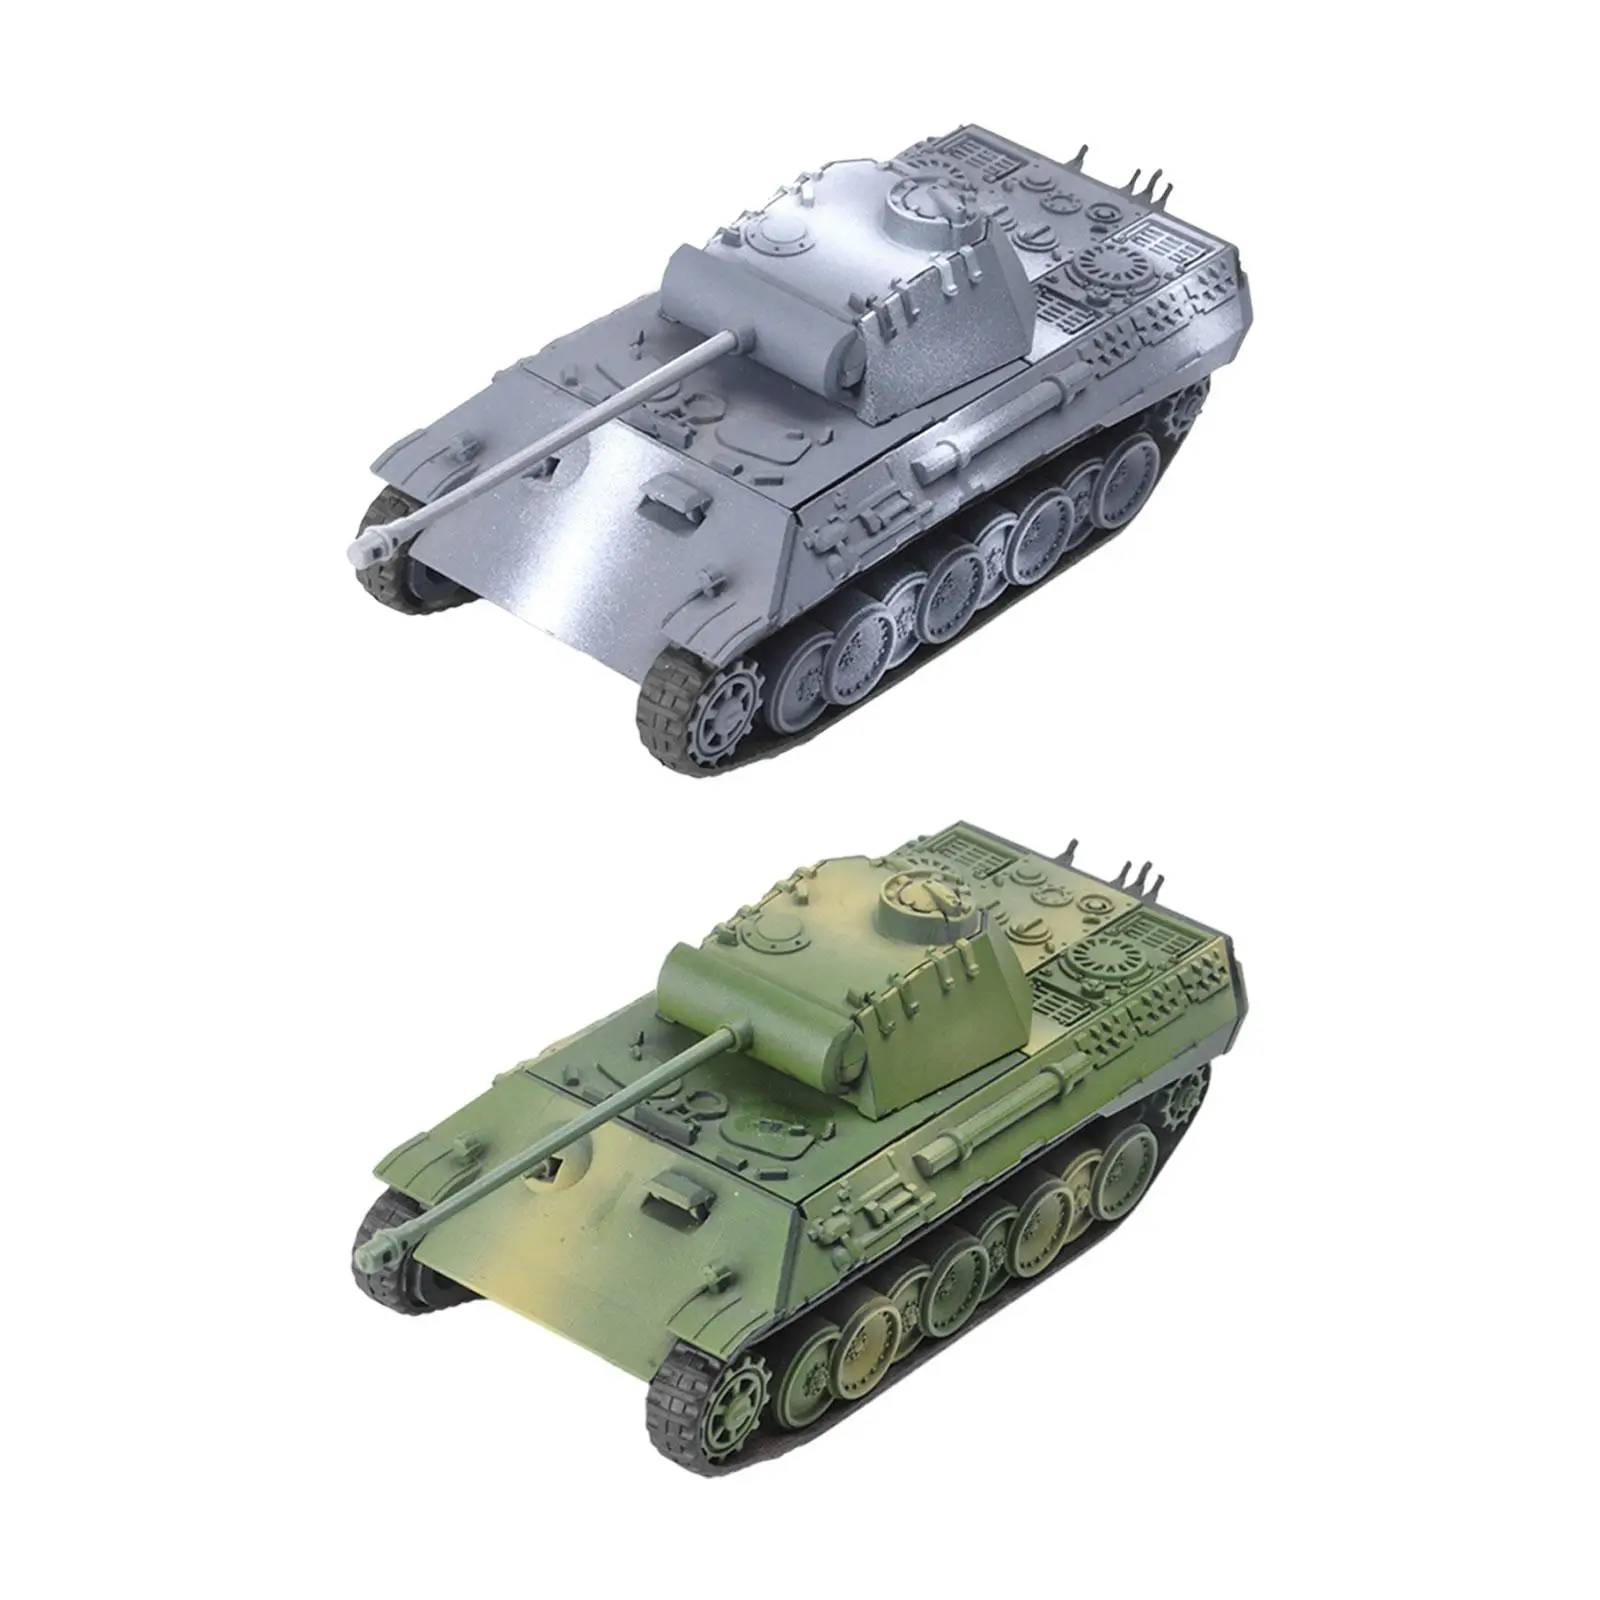 1:72 Scale Tank Model Kits DIY Assemble Table Scene Battle Tank Toy Collectible for Girls Boys Children Birthday Gift